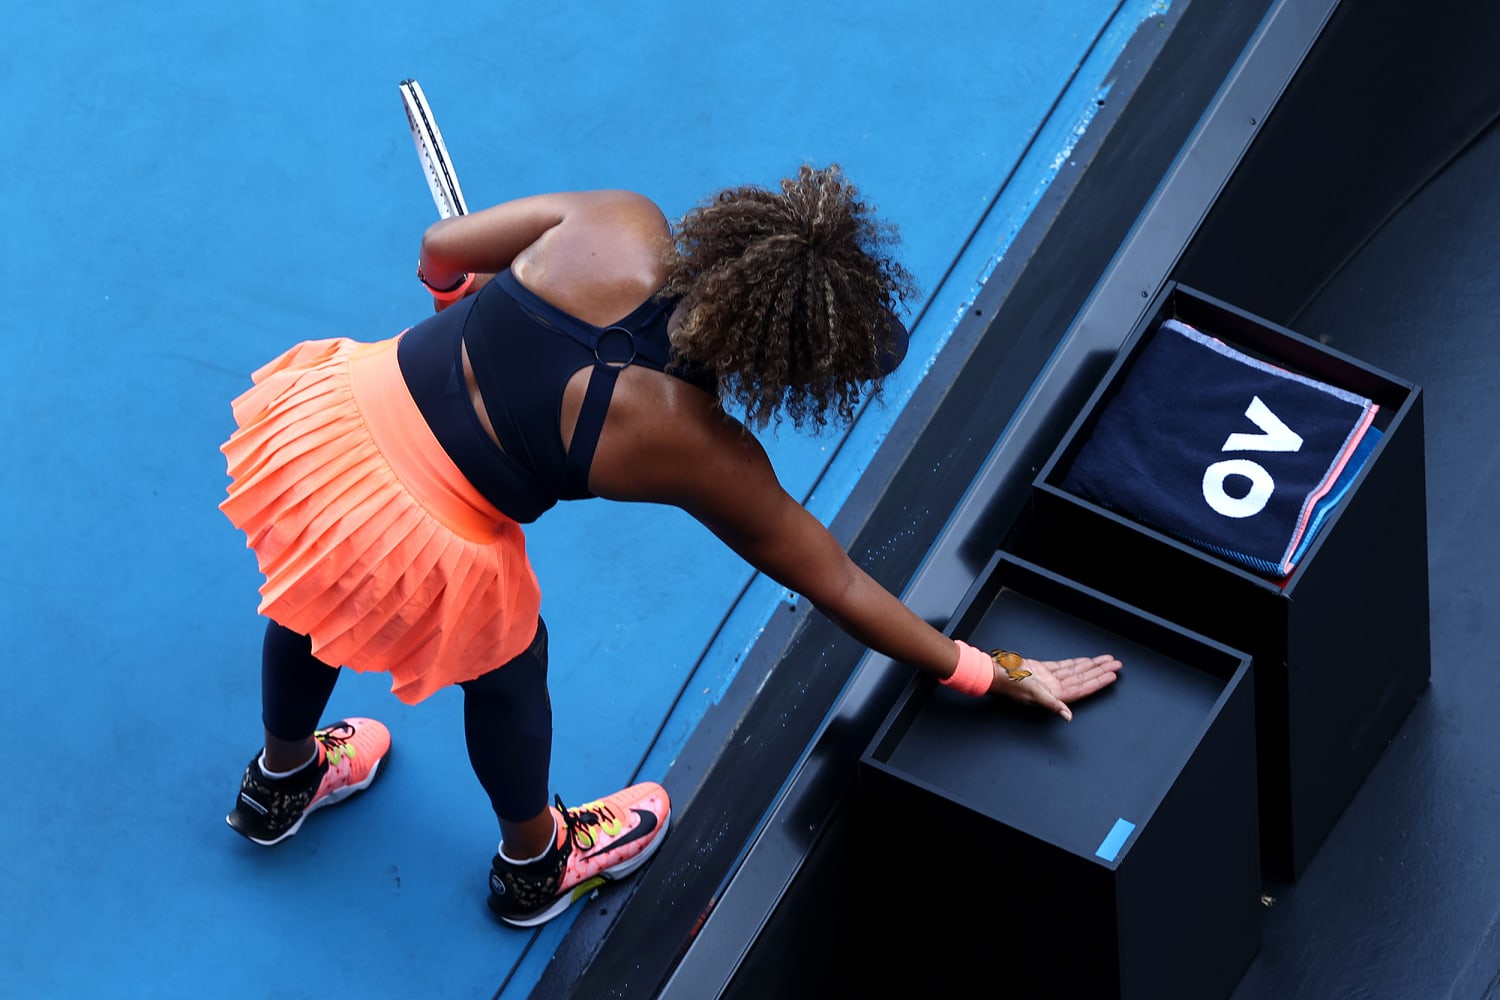 Naomi Osaka wore custom butterfly shoes in a callback to her viral